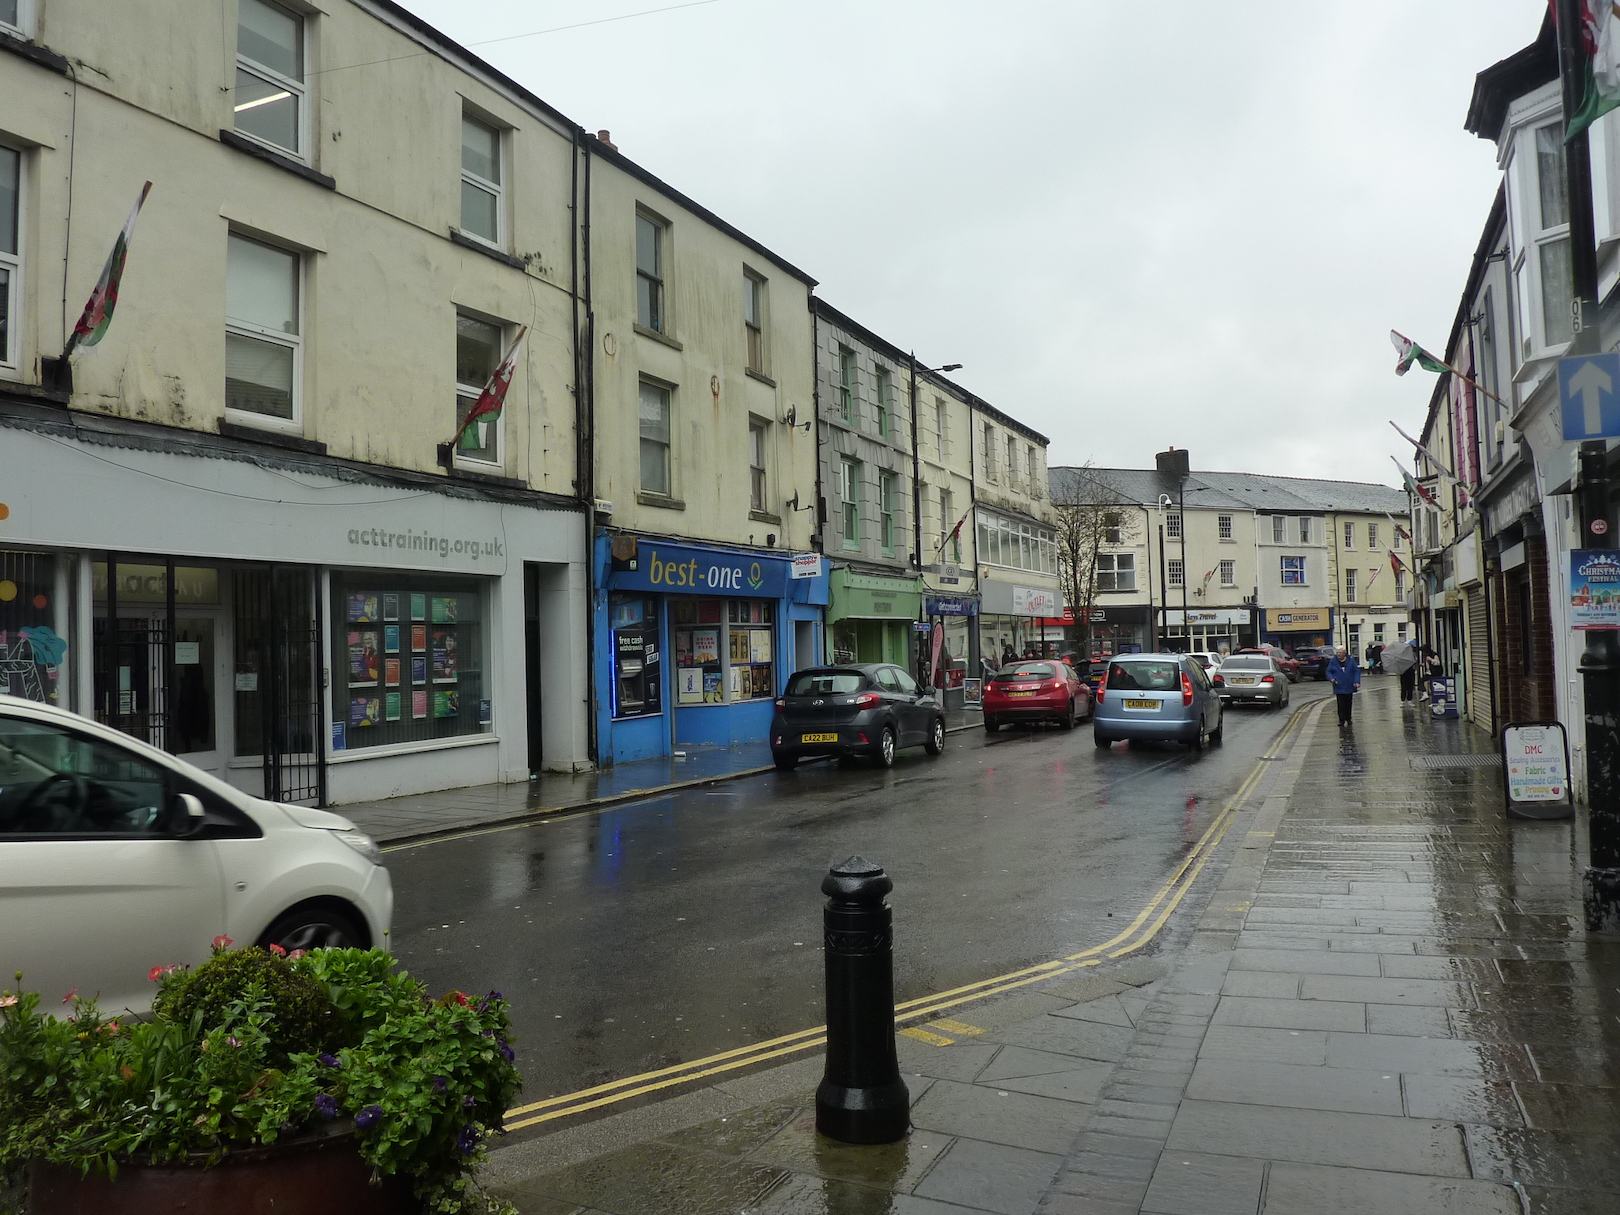 Is Aberdare Town and the rest of Cynon Valley benefiting from the Cardiff Capital Region?